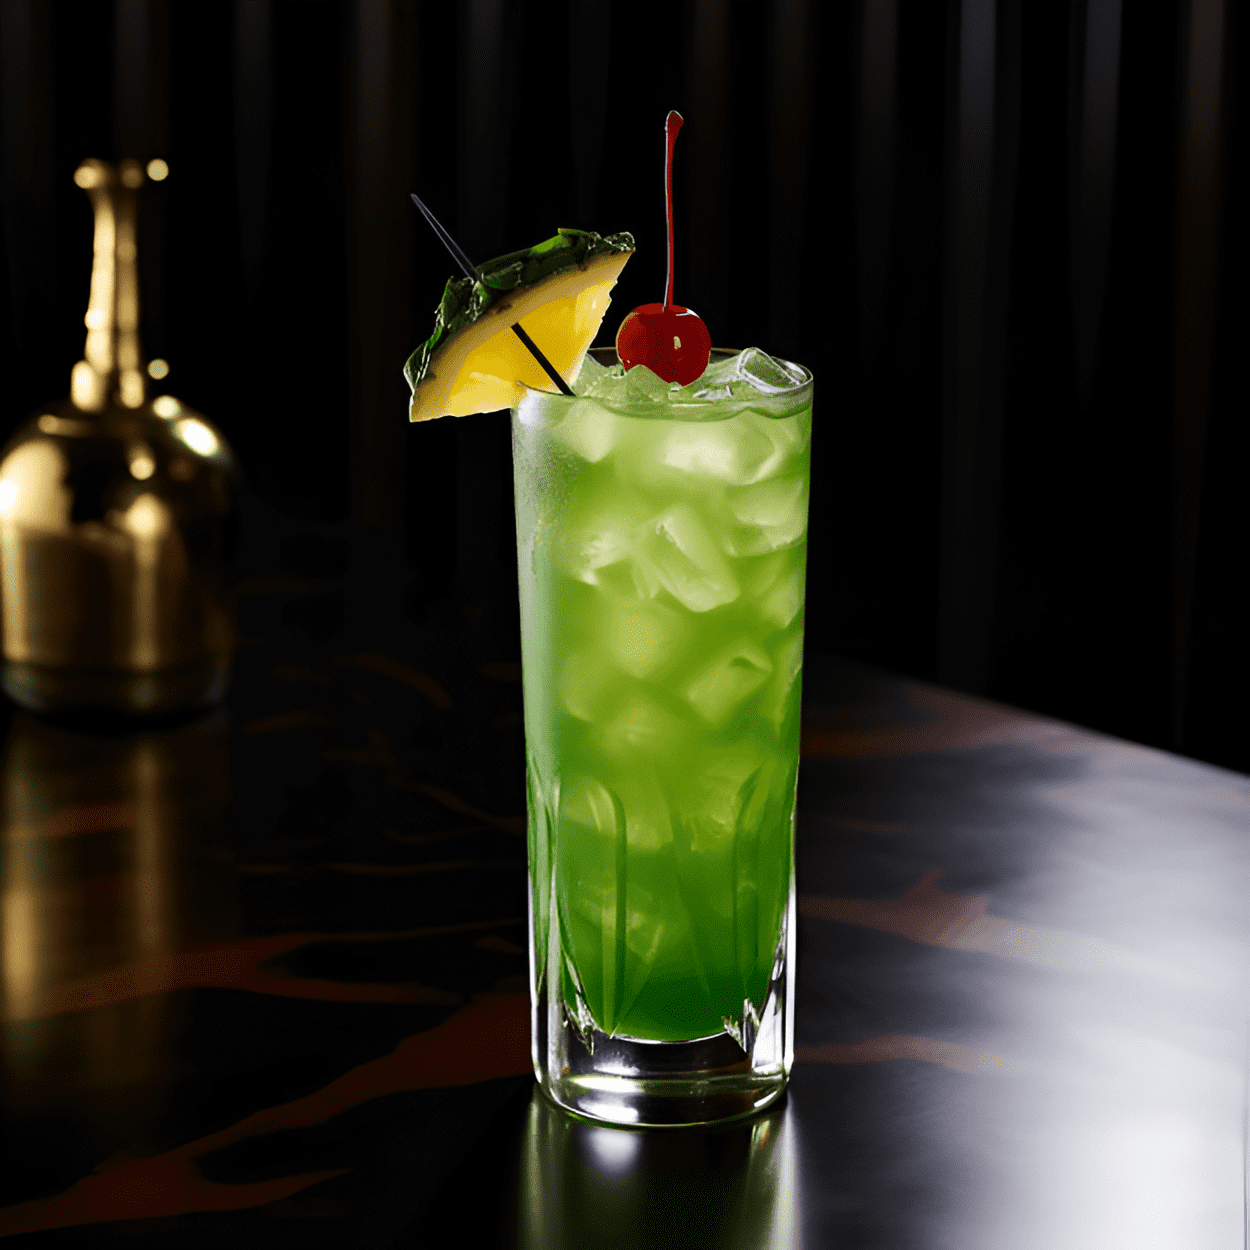 Pearl Harbor Cocktail Recipe - The Pearl Harbor is a sweet and fruity cocktail with a light hint of sourness. The dominant flavors are the tropical pineapple and the smooth, sweet melon from the Midori. The vodka adds a subtle kick without overpowering the other flavors.